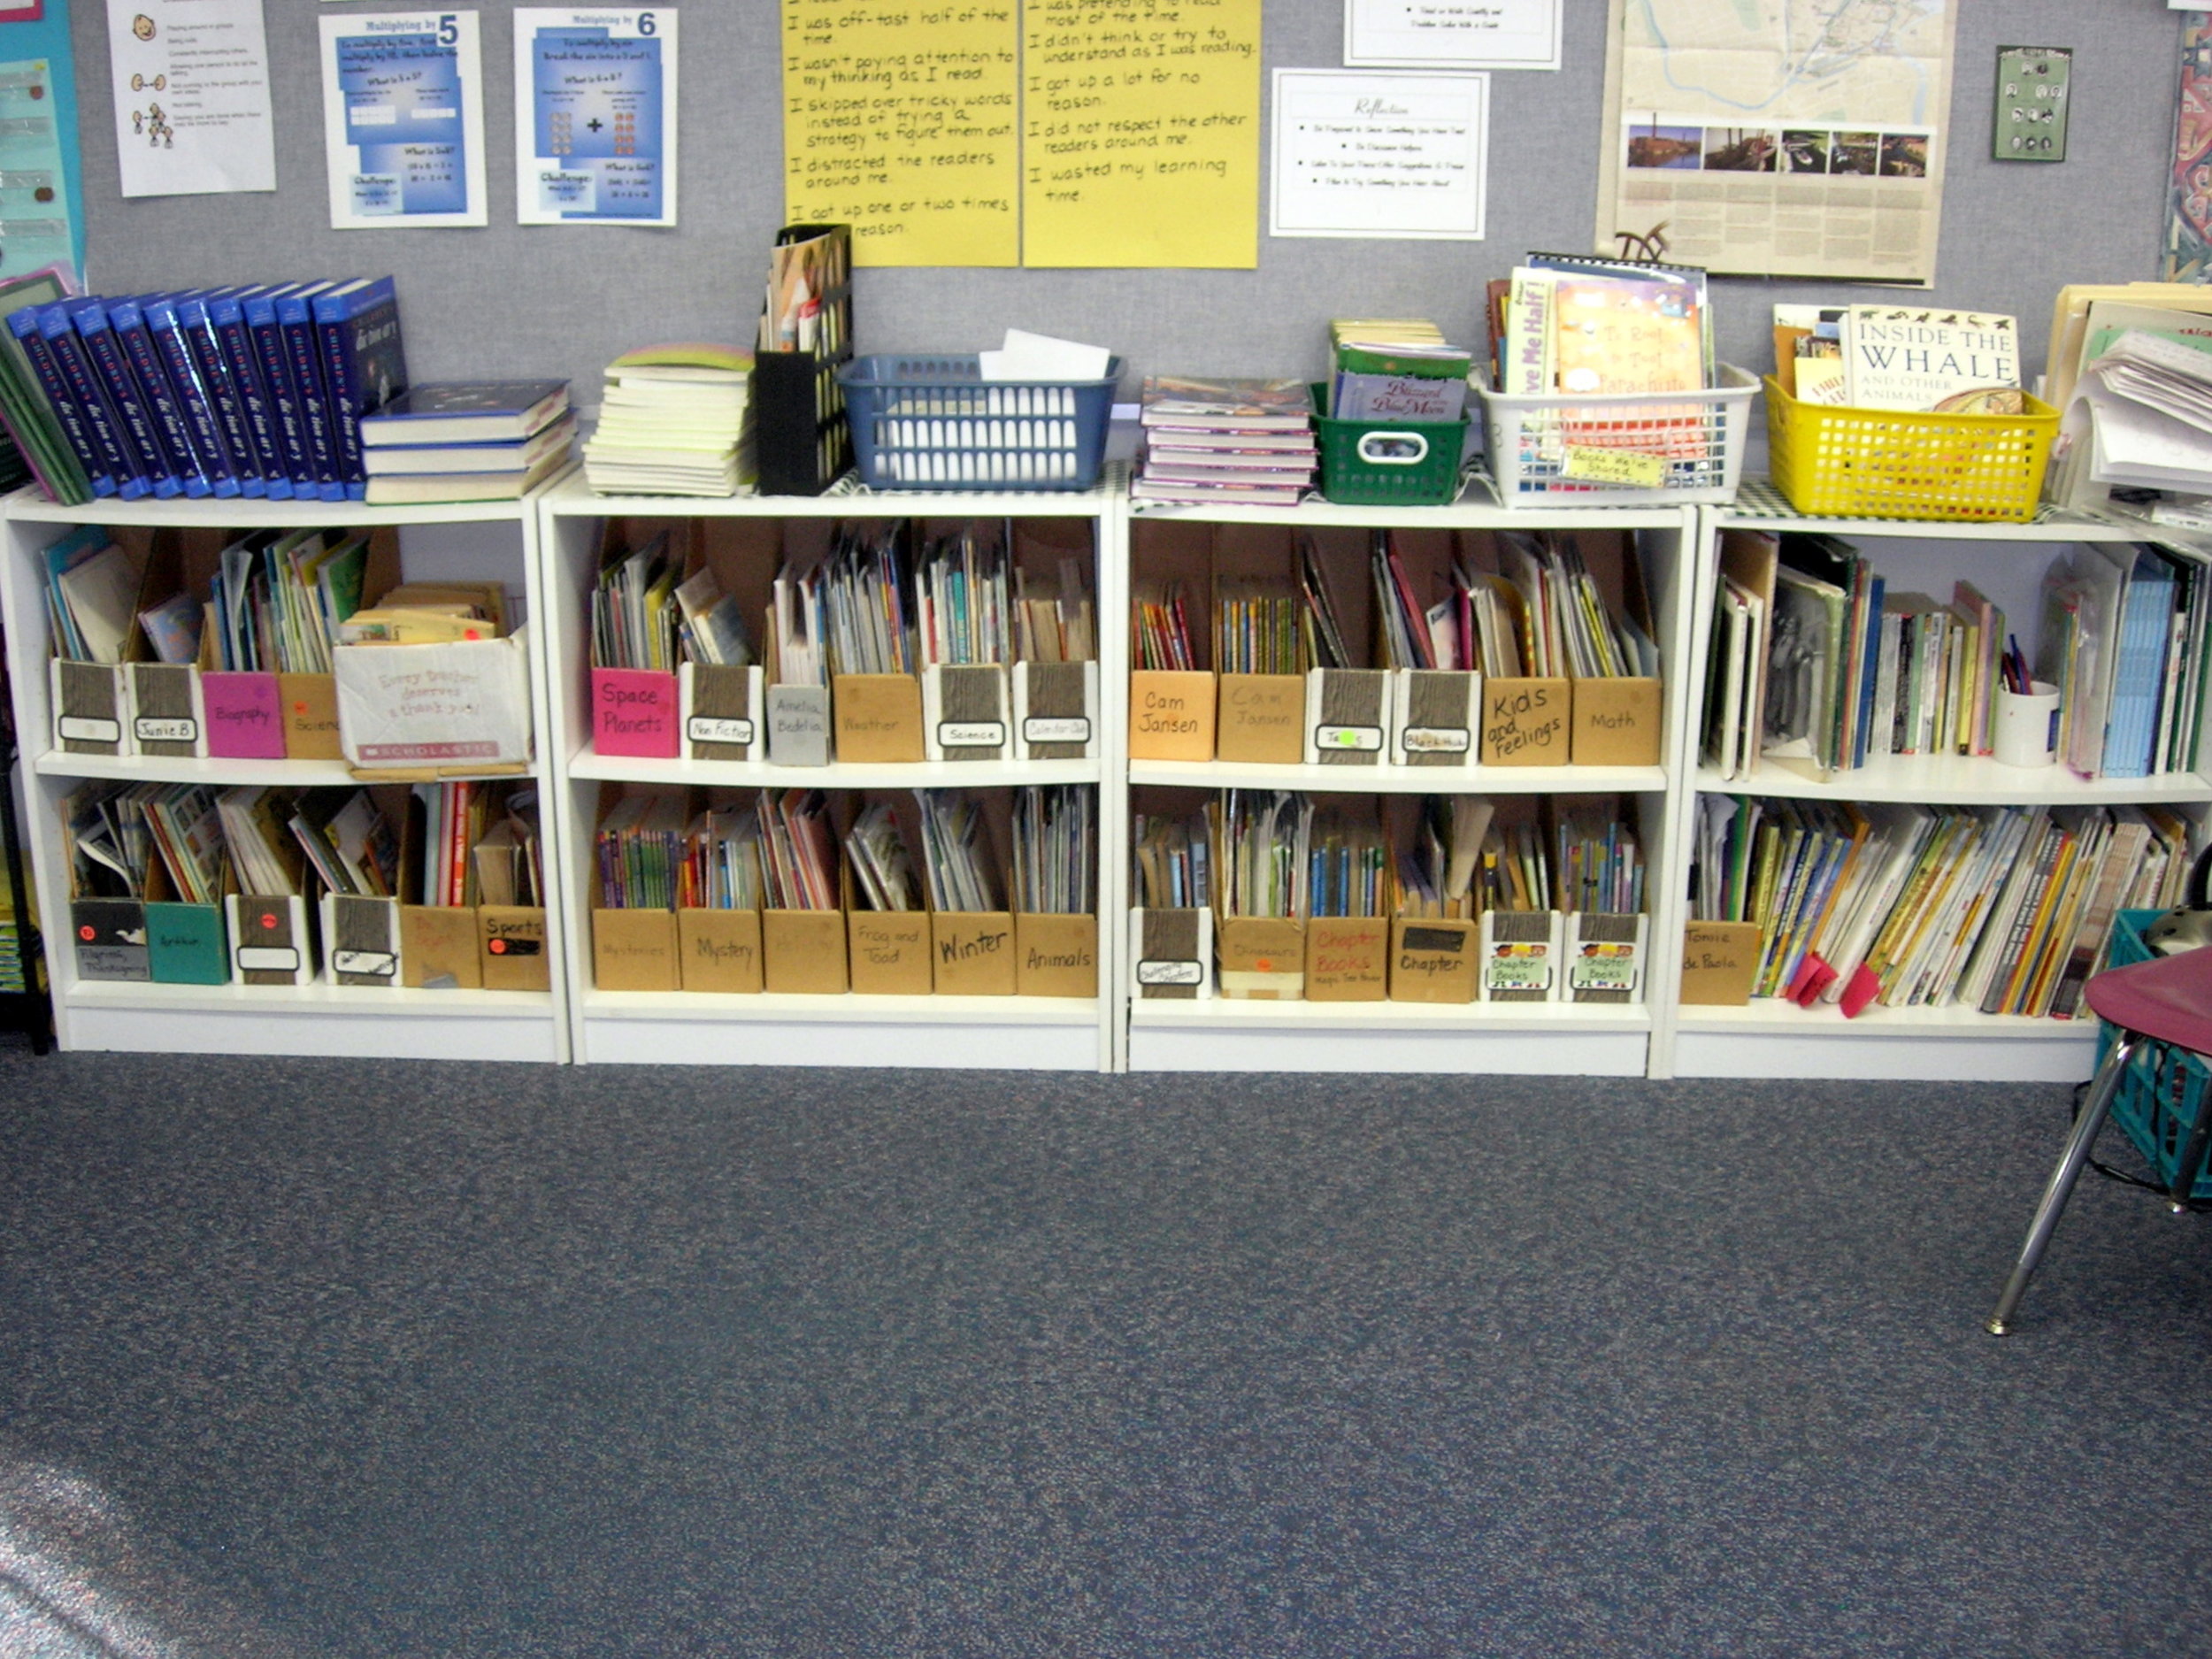 Most of these books are organized by Genre, Author, or some other category.